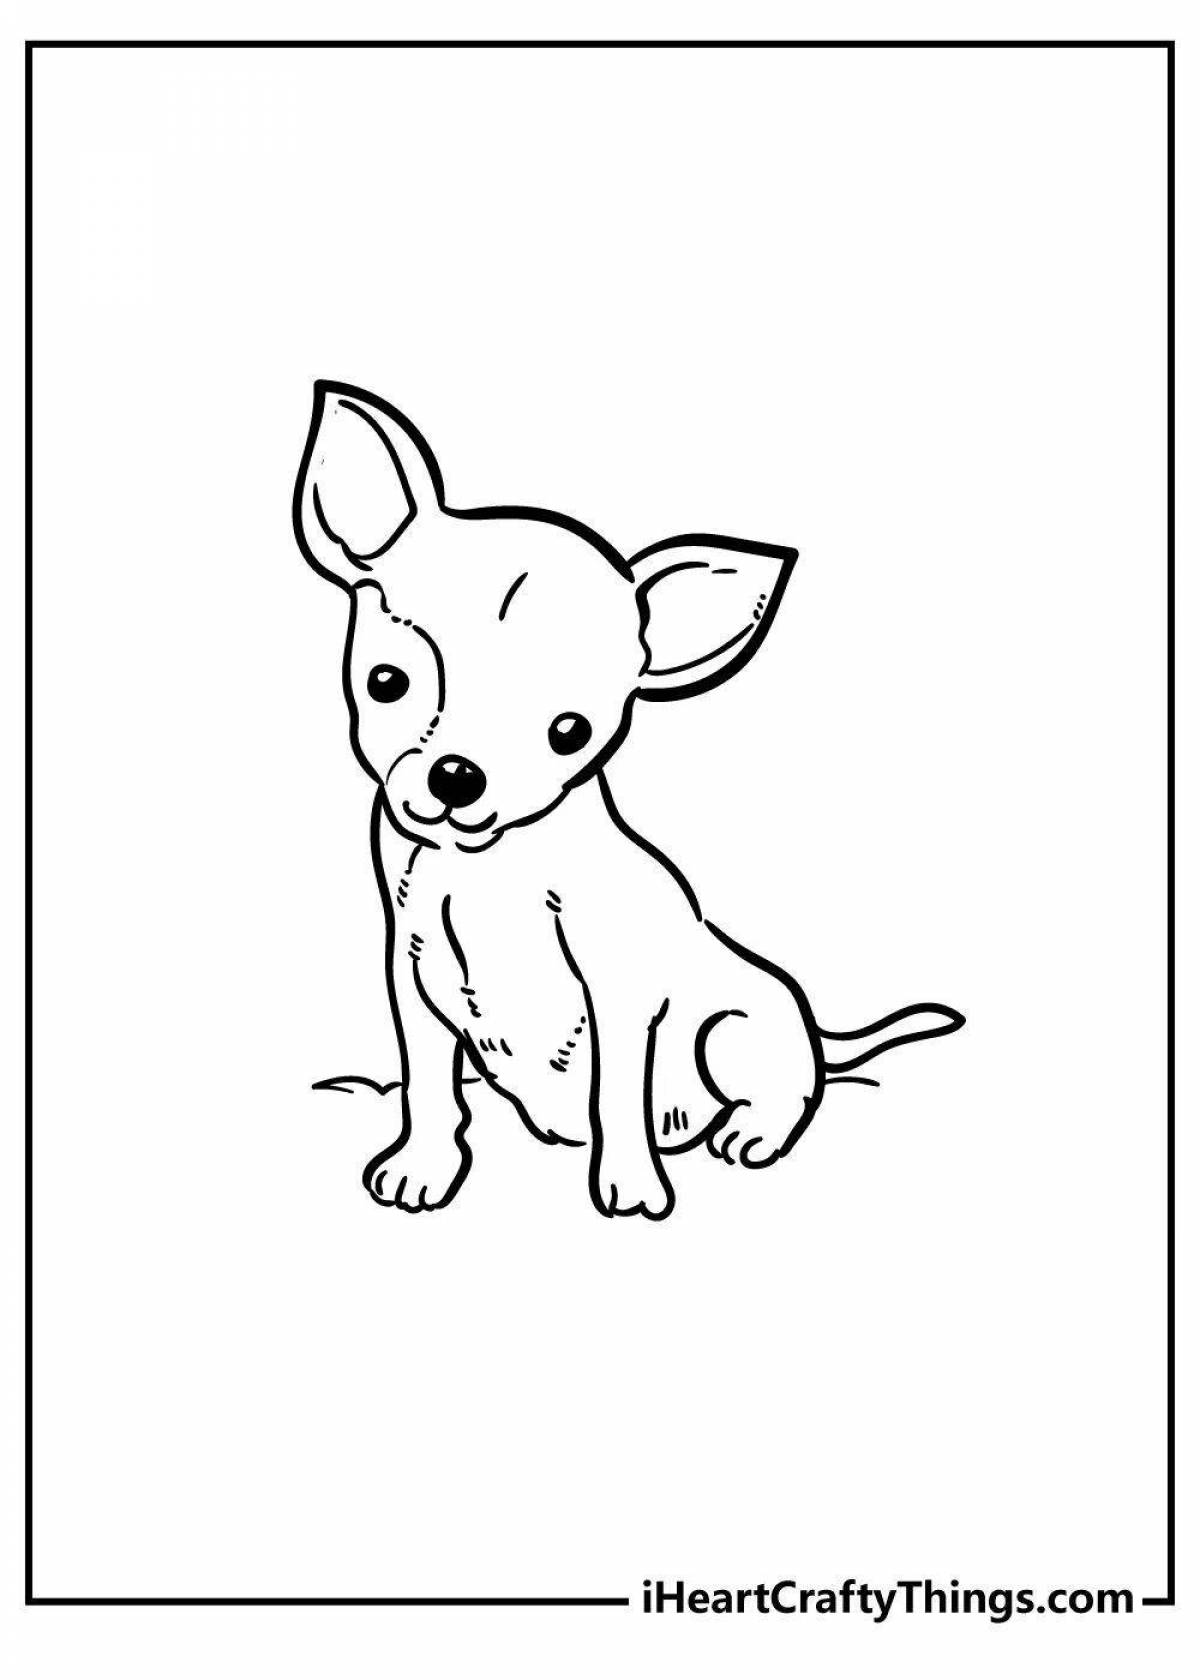 Chihuahua humorous coloring book for kids